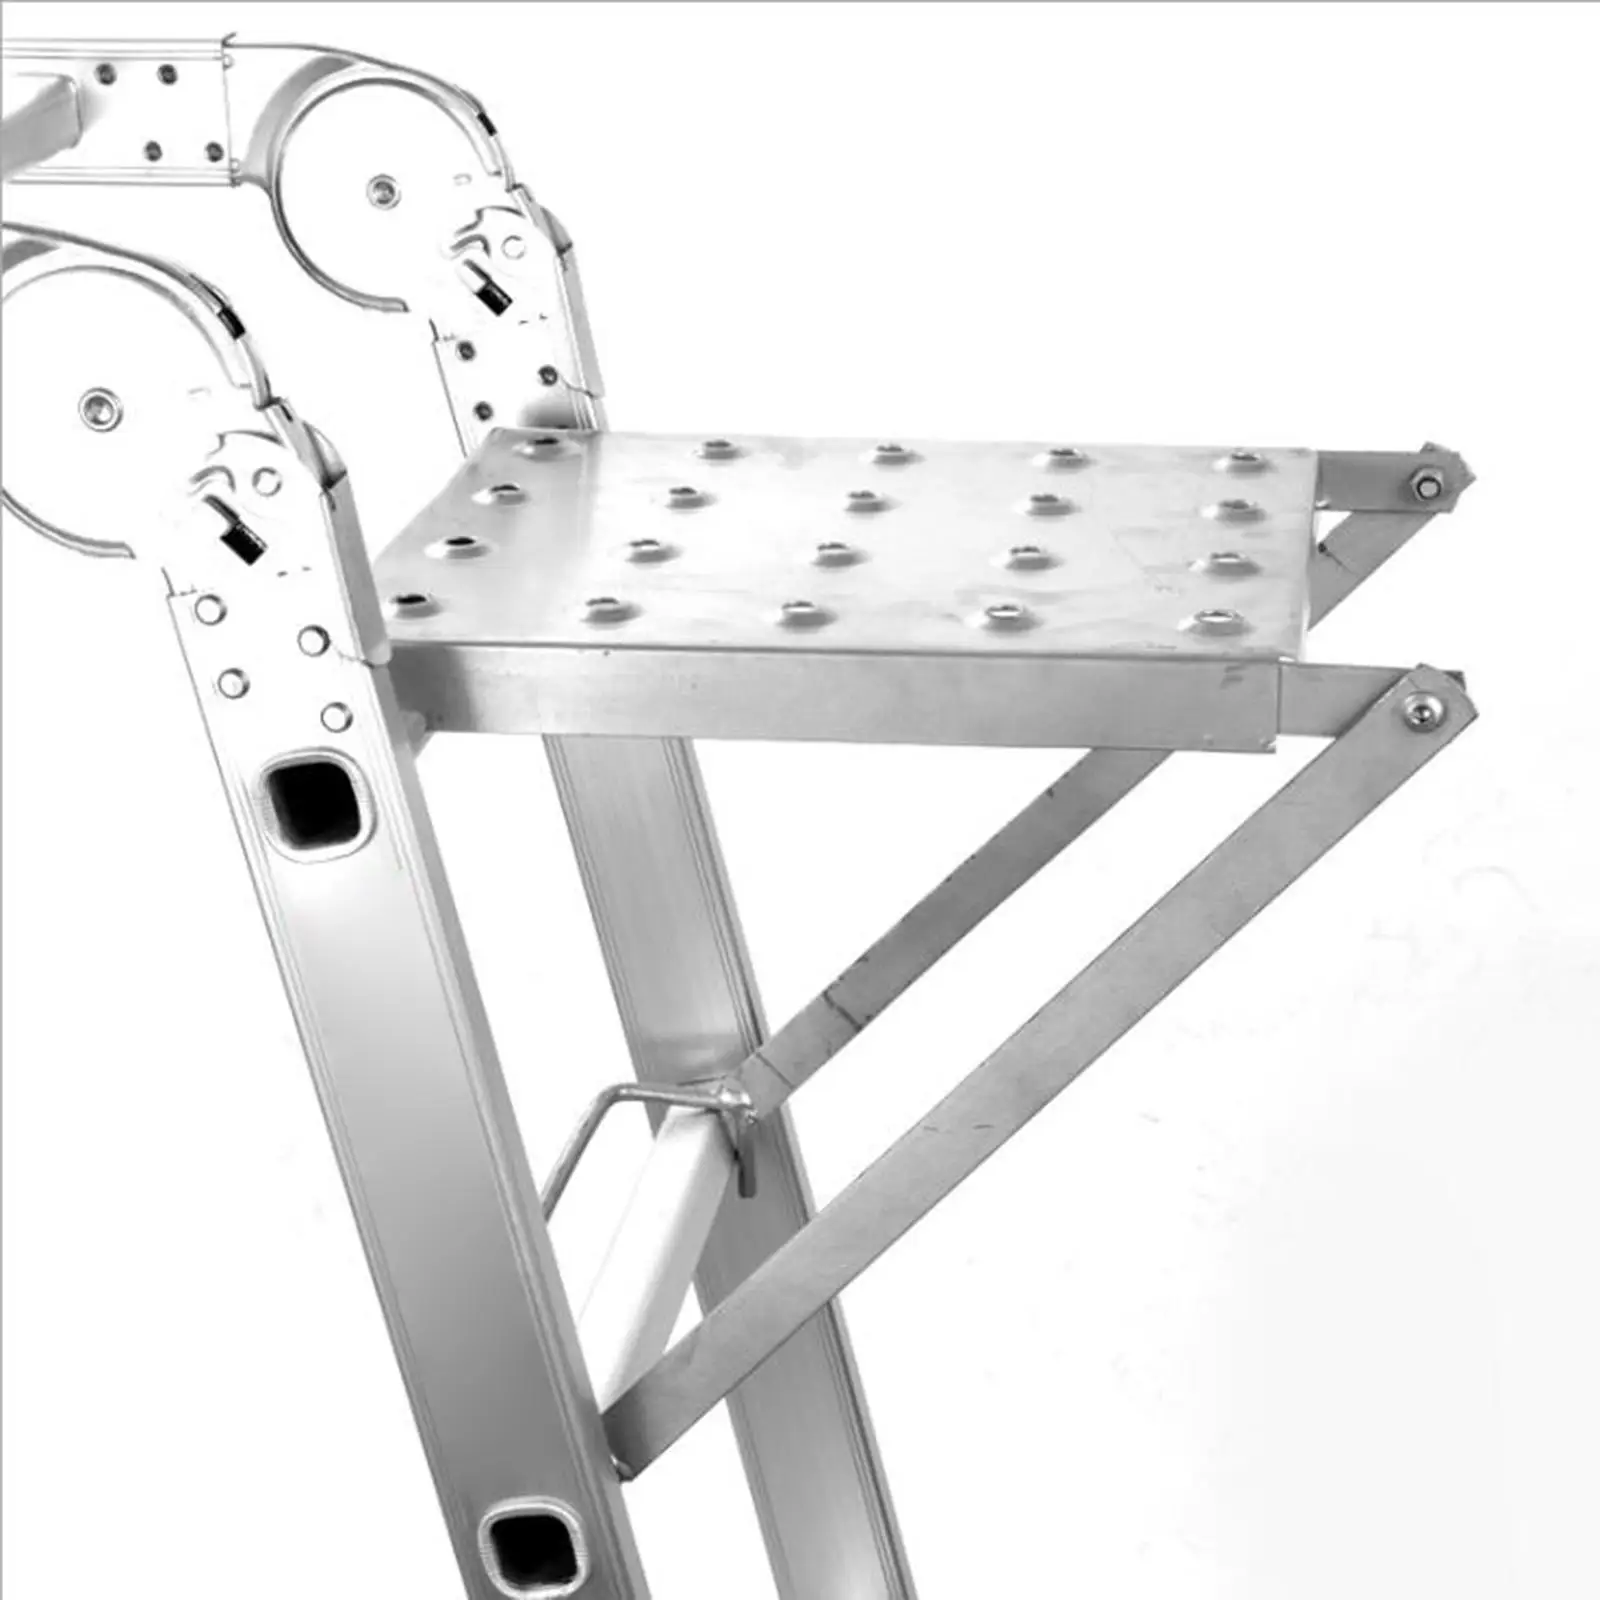 Ladder Work Platform Durable Wide Pedal Practical Attachment Work Ladder Tray for Pantry Kitchen Office Household Painters